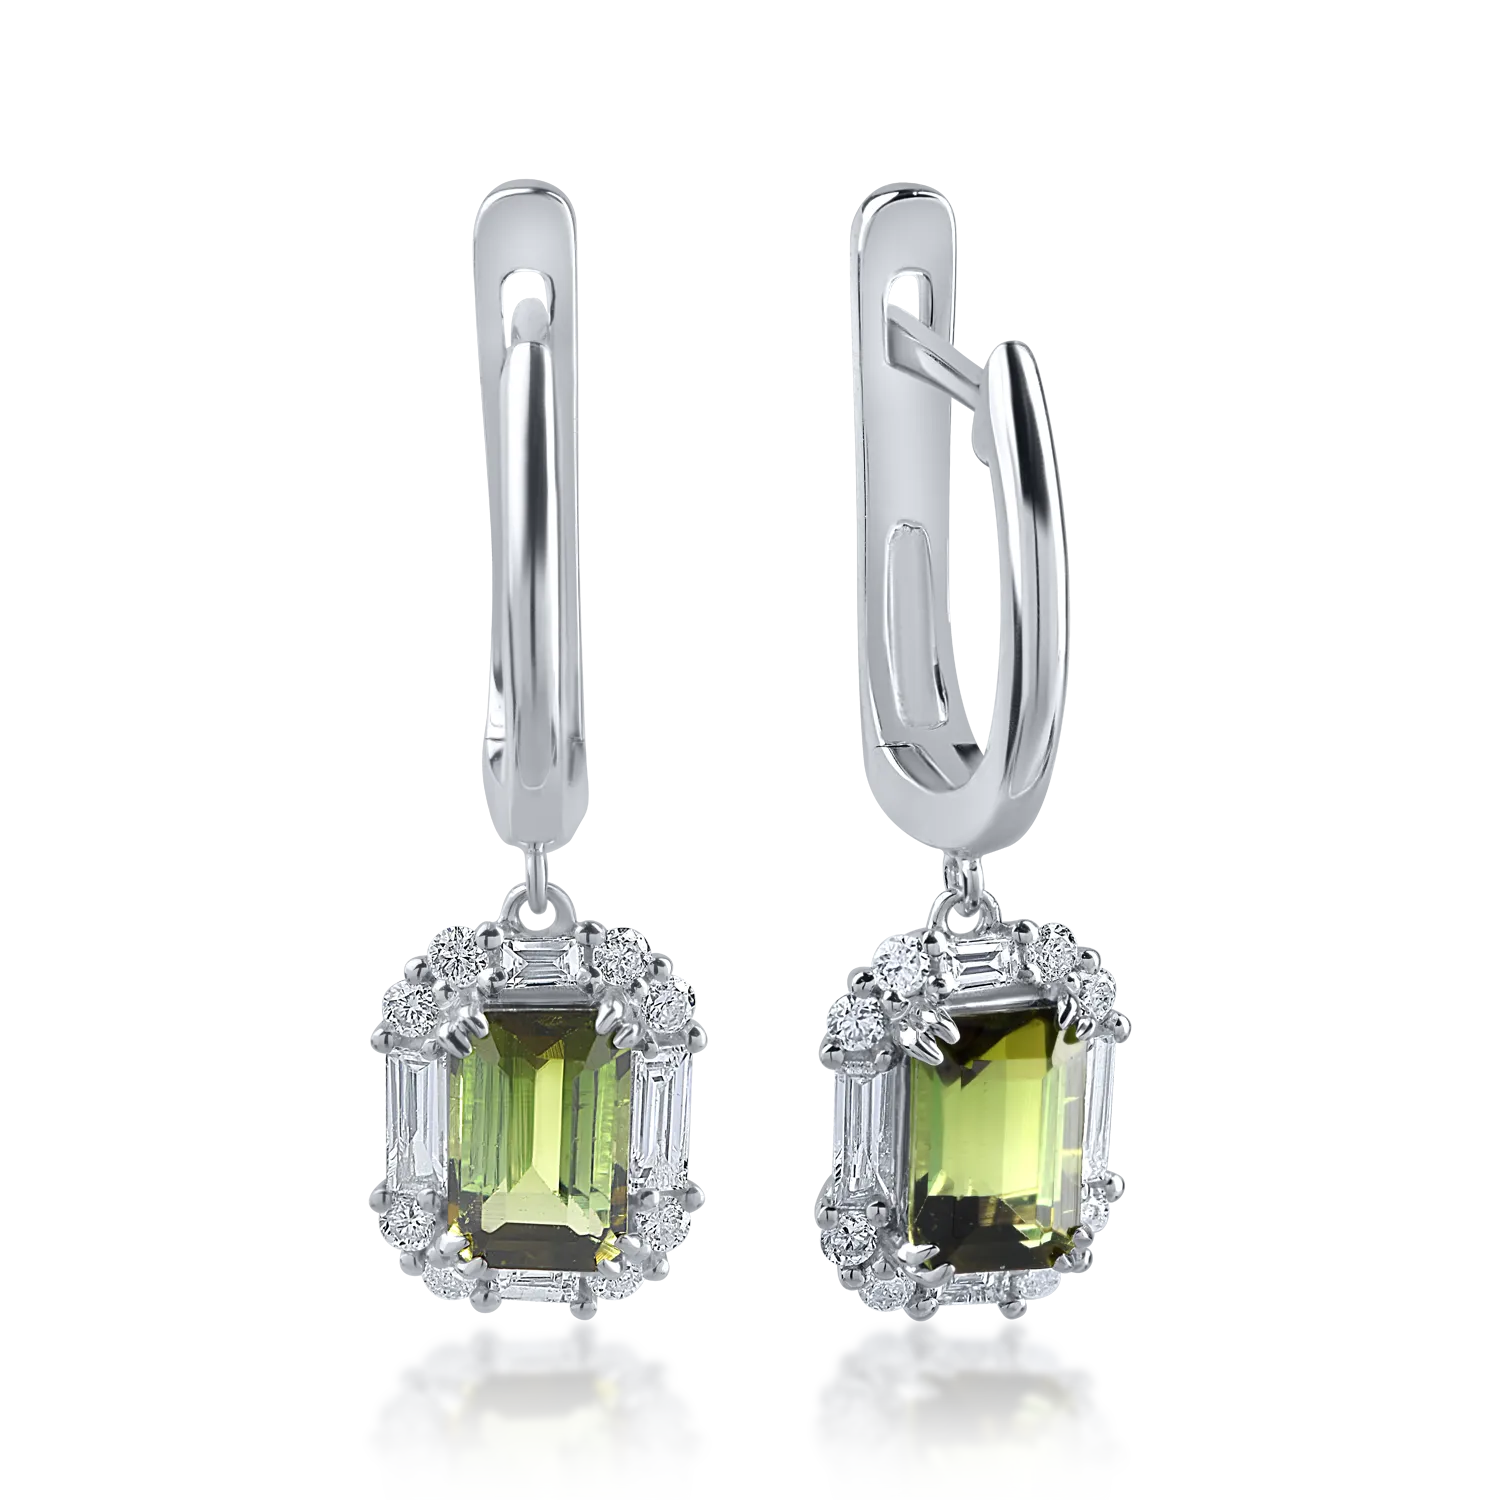 White gold earrings with 1.23ct green tourmalines and 0.39ct diamonds